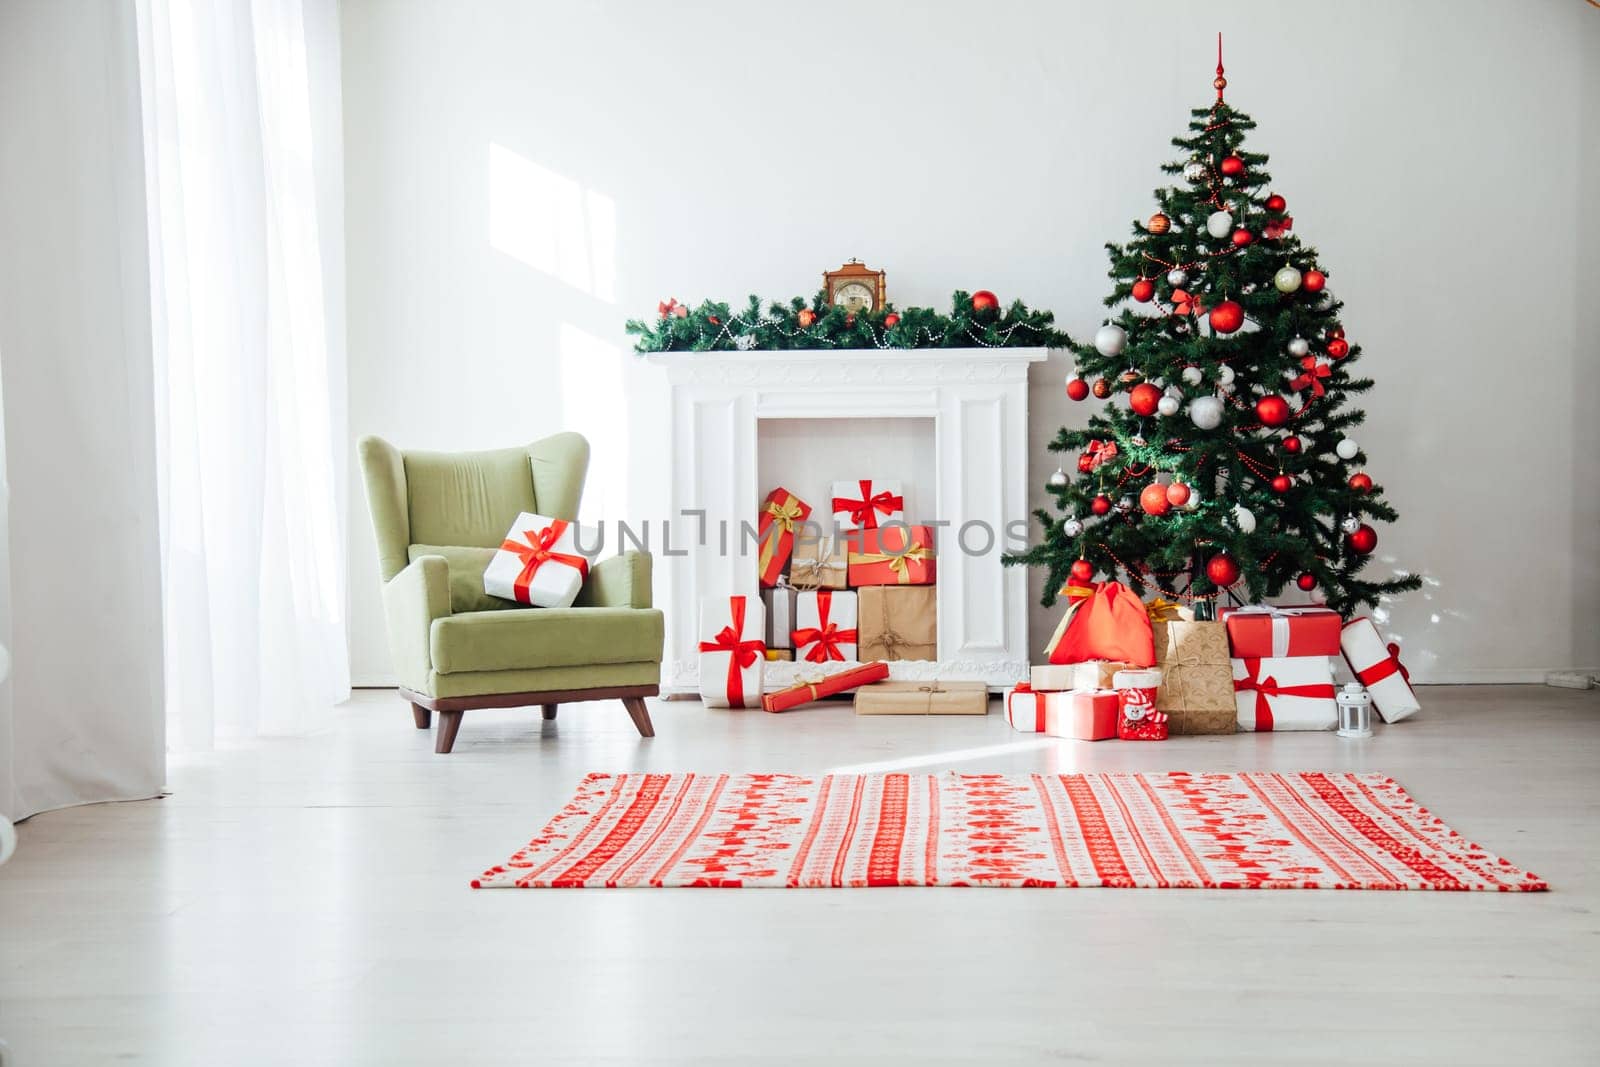 Christmas home interior Christmas tree red gifts new year decor festive background by Simakov